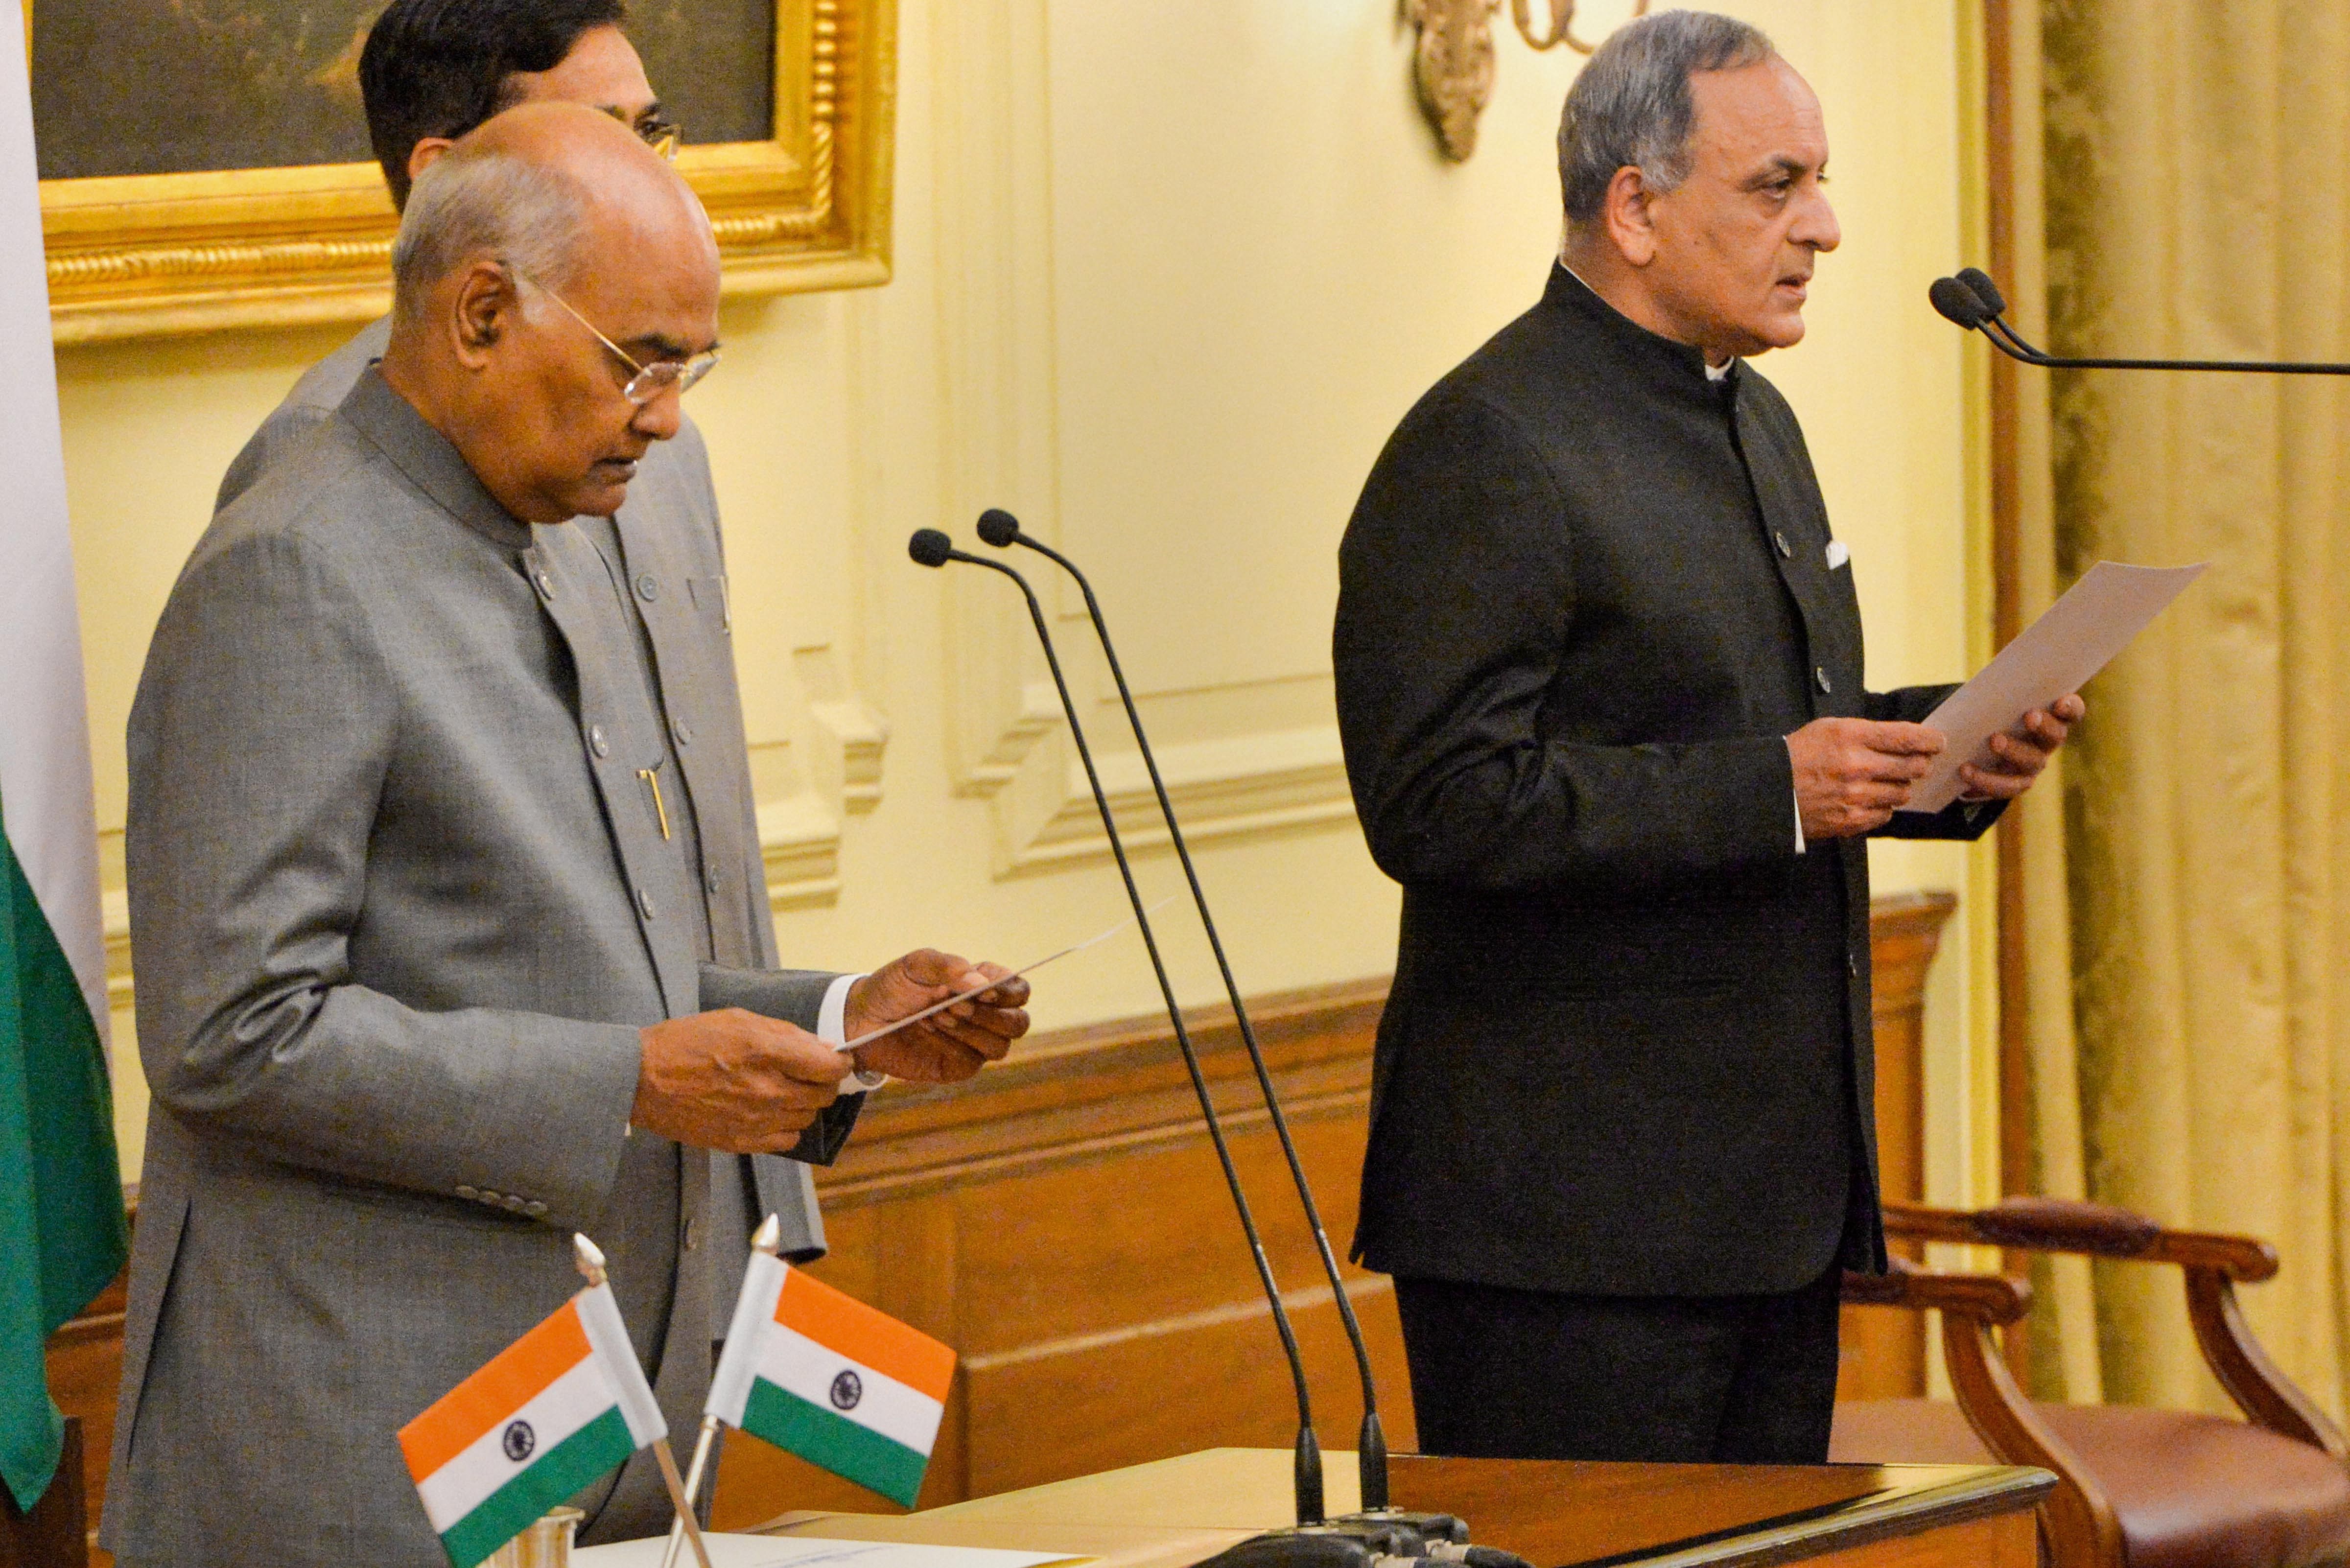 President Ram Nath Kovind (L) administers oath to Bimal Julka as the new Chief Information Commissioner (CIC) during a swearing-in-ceremony at Rashtrapati Bhavan, in New Delhi, Friday, March 6, 2020. (Credit: PTI)